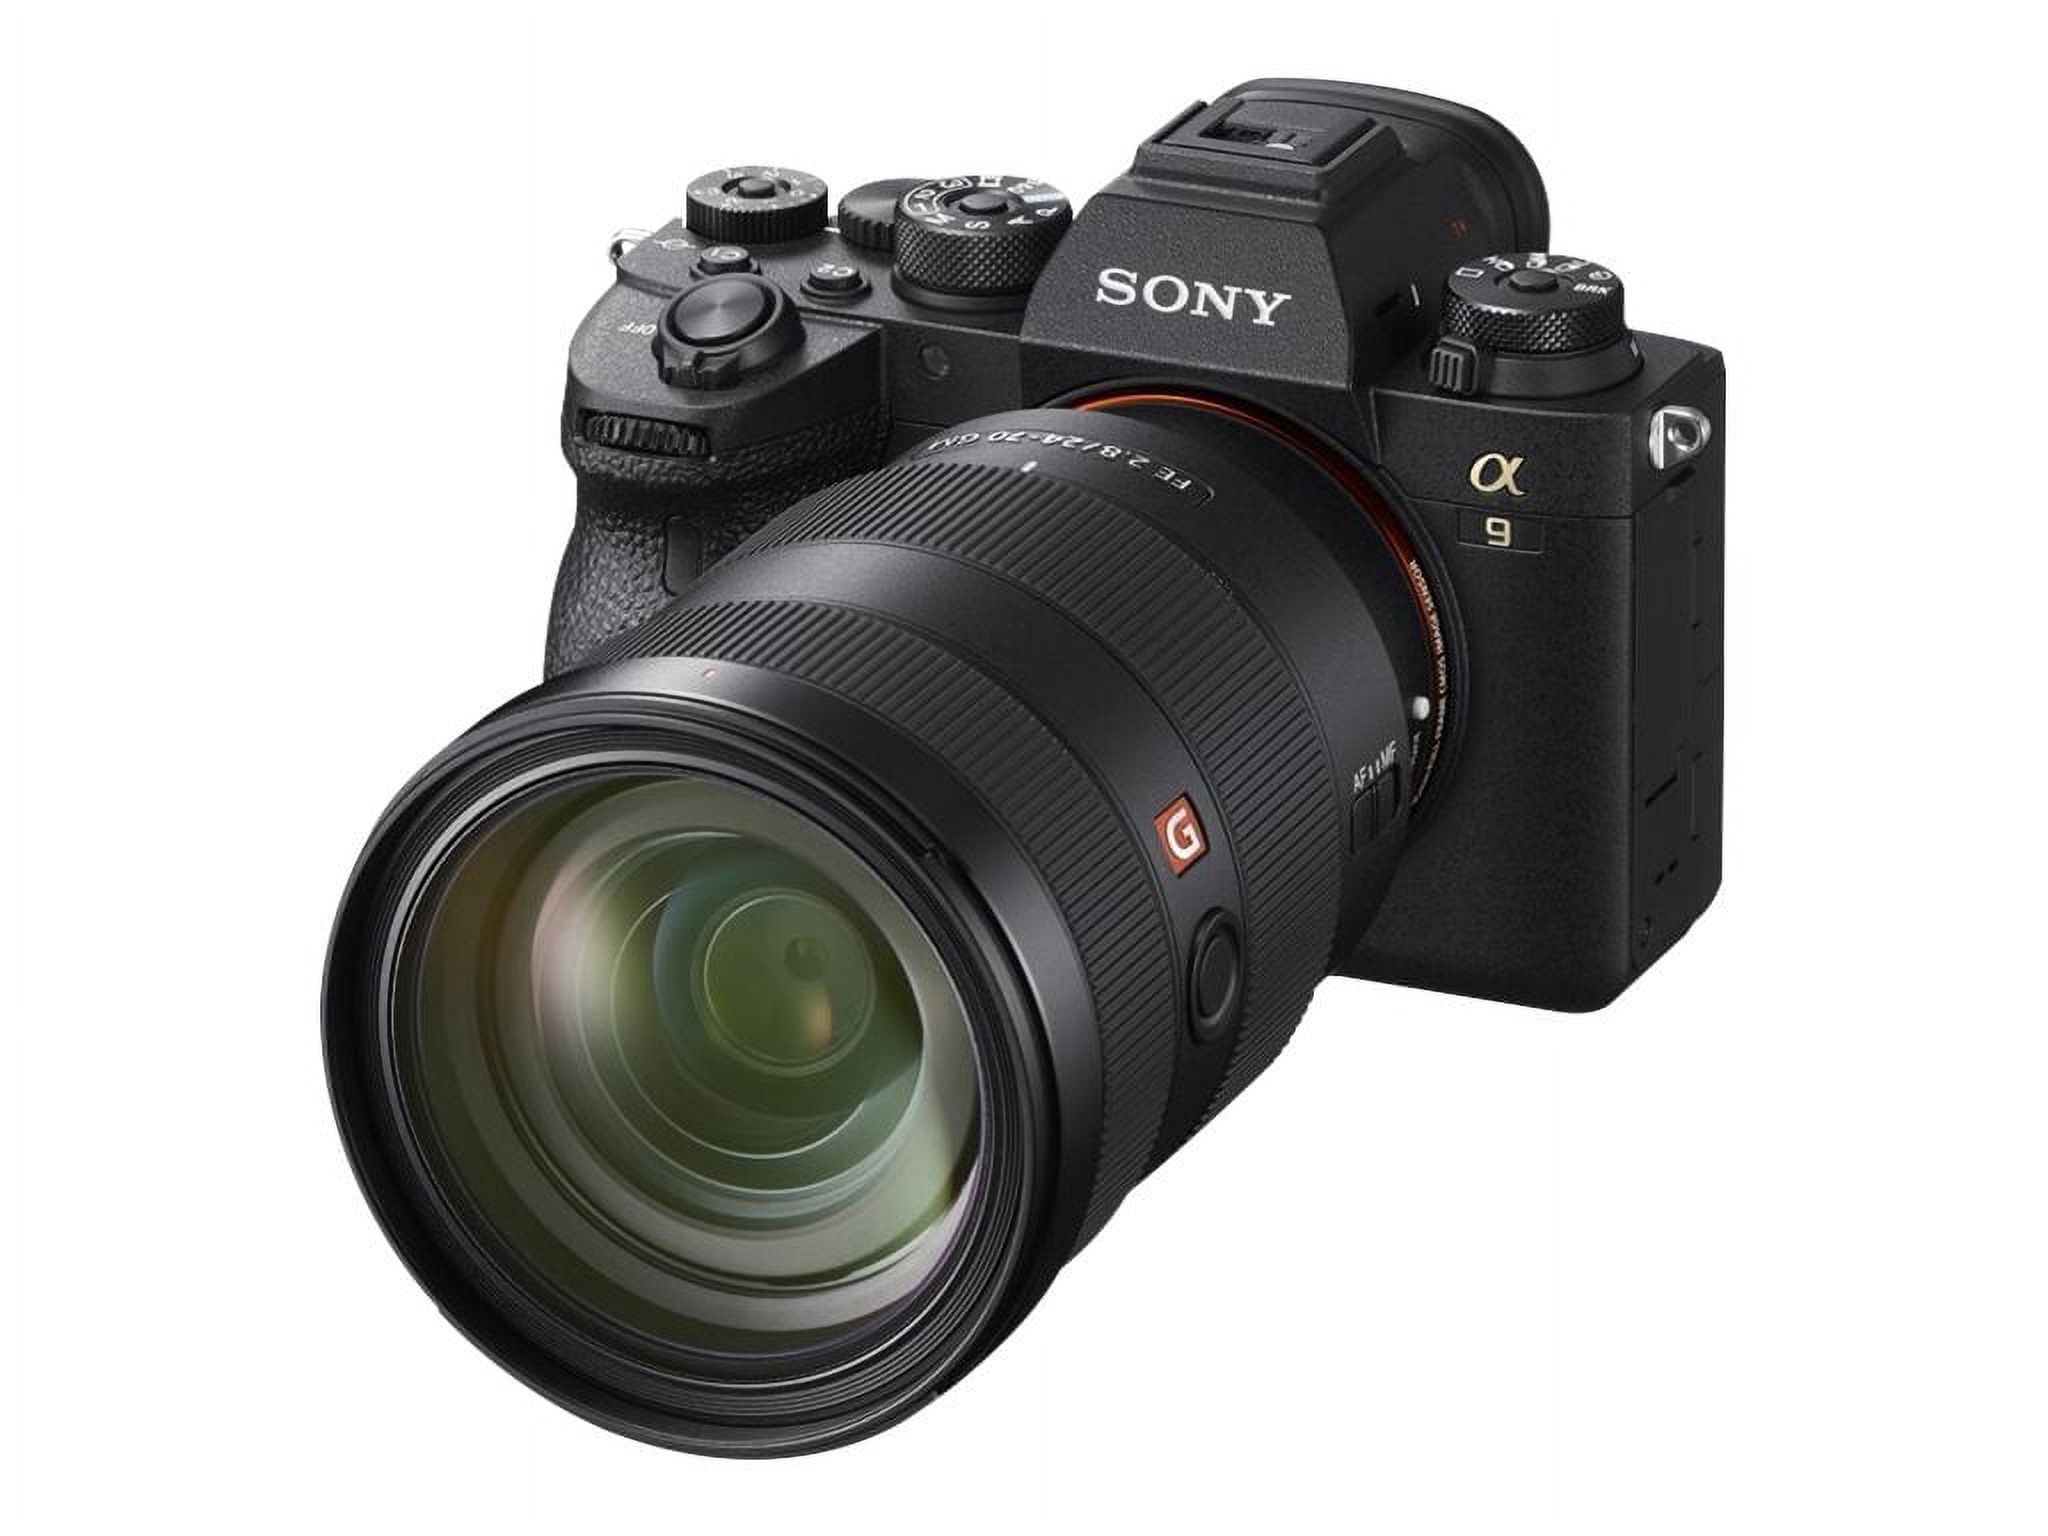 Sony a9 II ILCE-9M2 - Digital camera - mirrorless - 24.2 MP - Full Frame - 4K / 30 fps - body only - NFC, Wi-Fi, Bluetooth - black - image 5 of 14